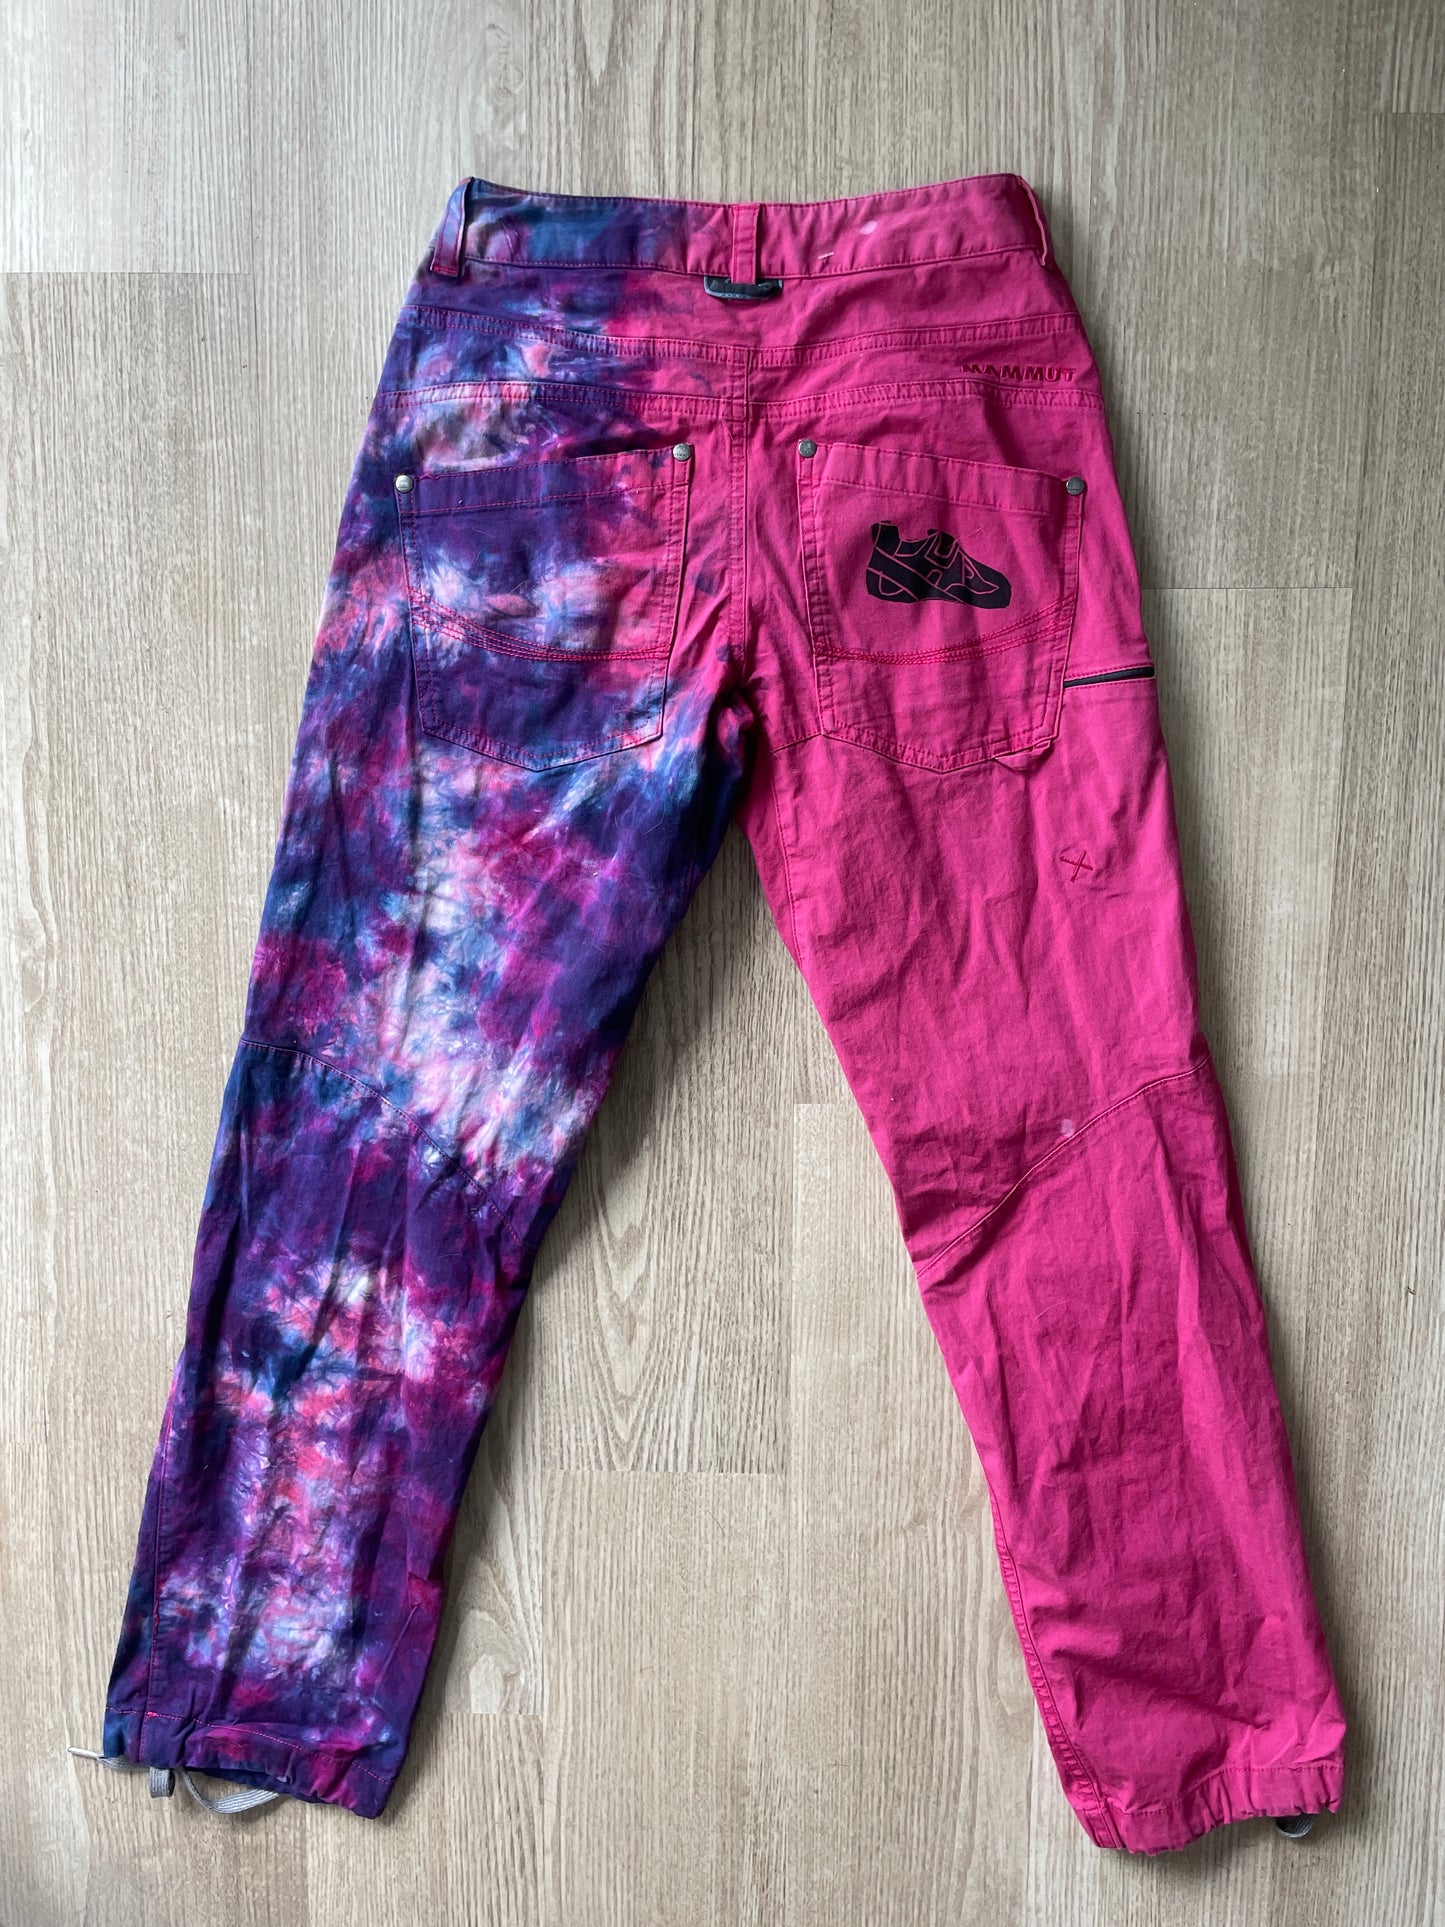 Women's Size 2 Mammut Tie Dye Climbing Pants | One-Of-a-Kind Upcycled Pink and Purple Pants